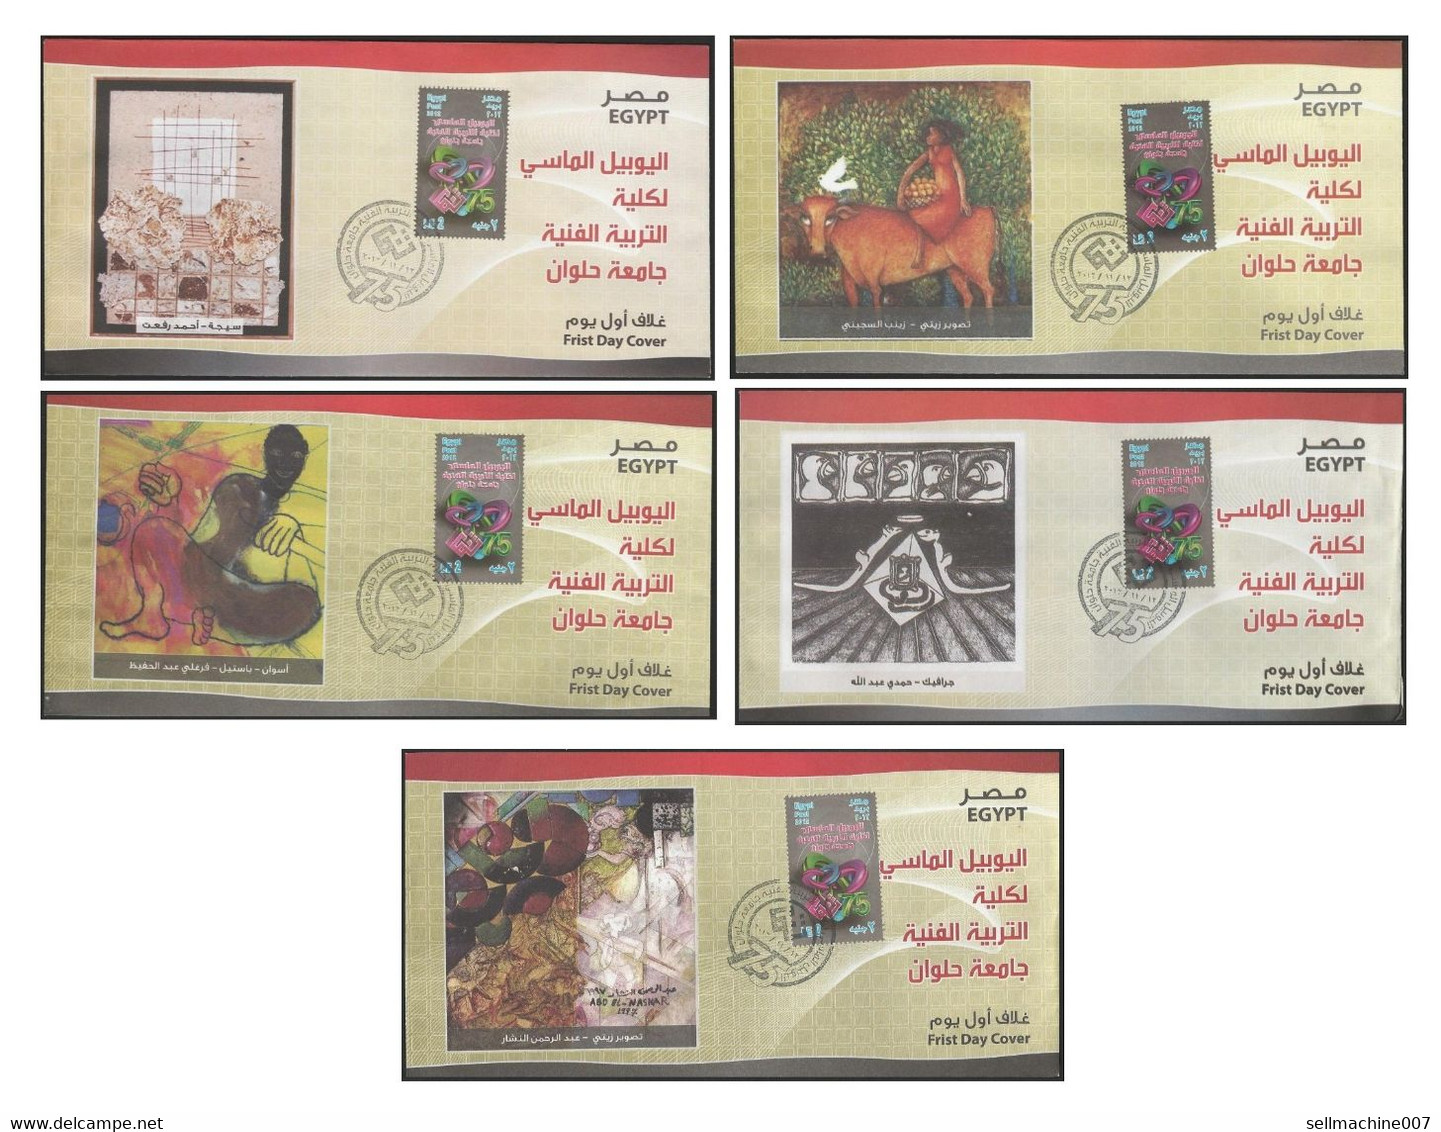 Egypt 2012 FDC SET OF 5 Different Covers FACULTY OF ART HELWAN UNIVERSITY First Day Cover - Covers & Documents